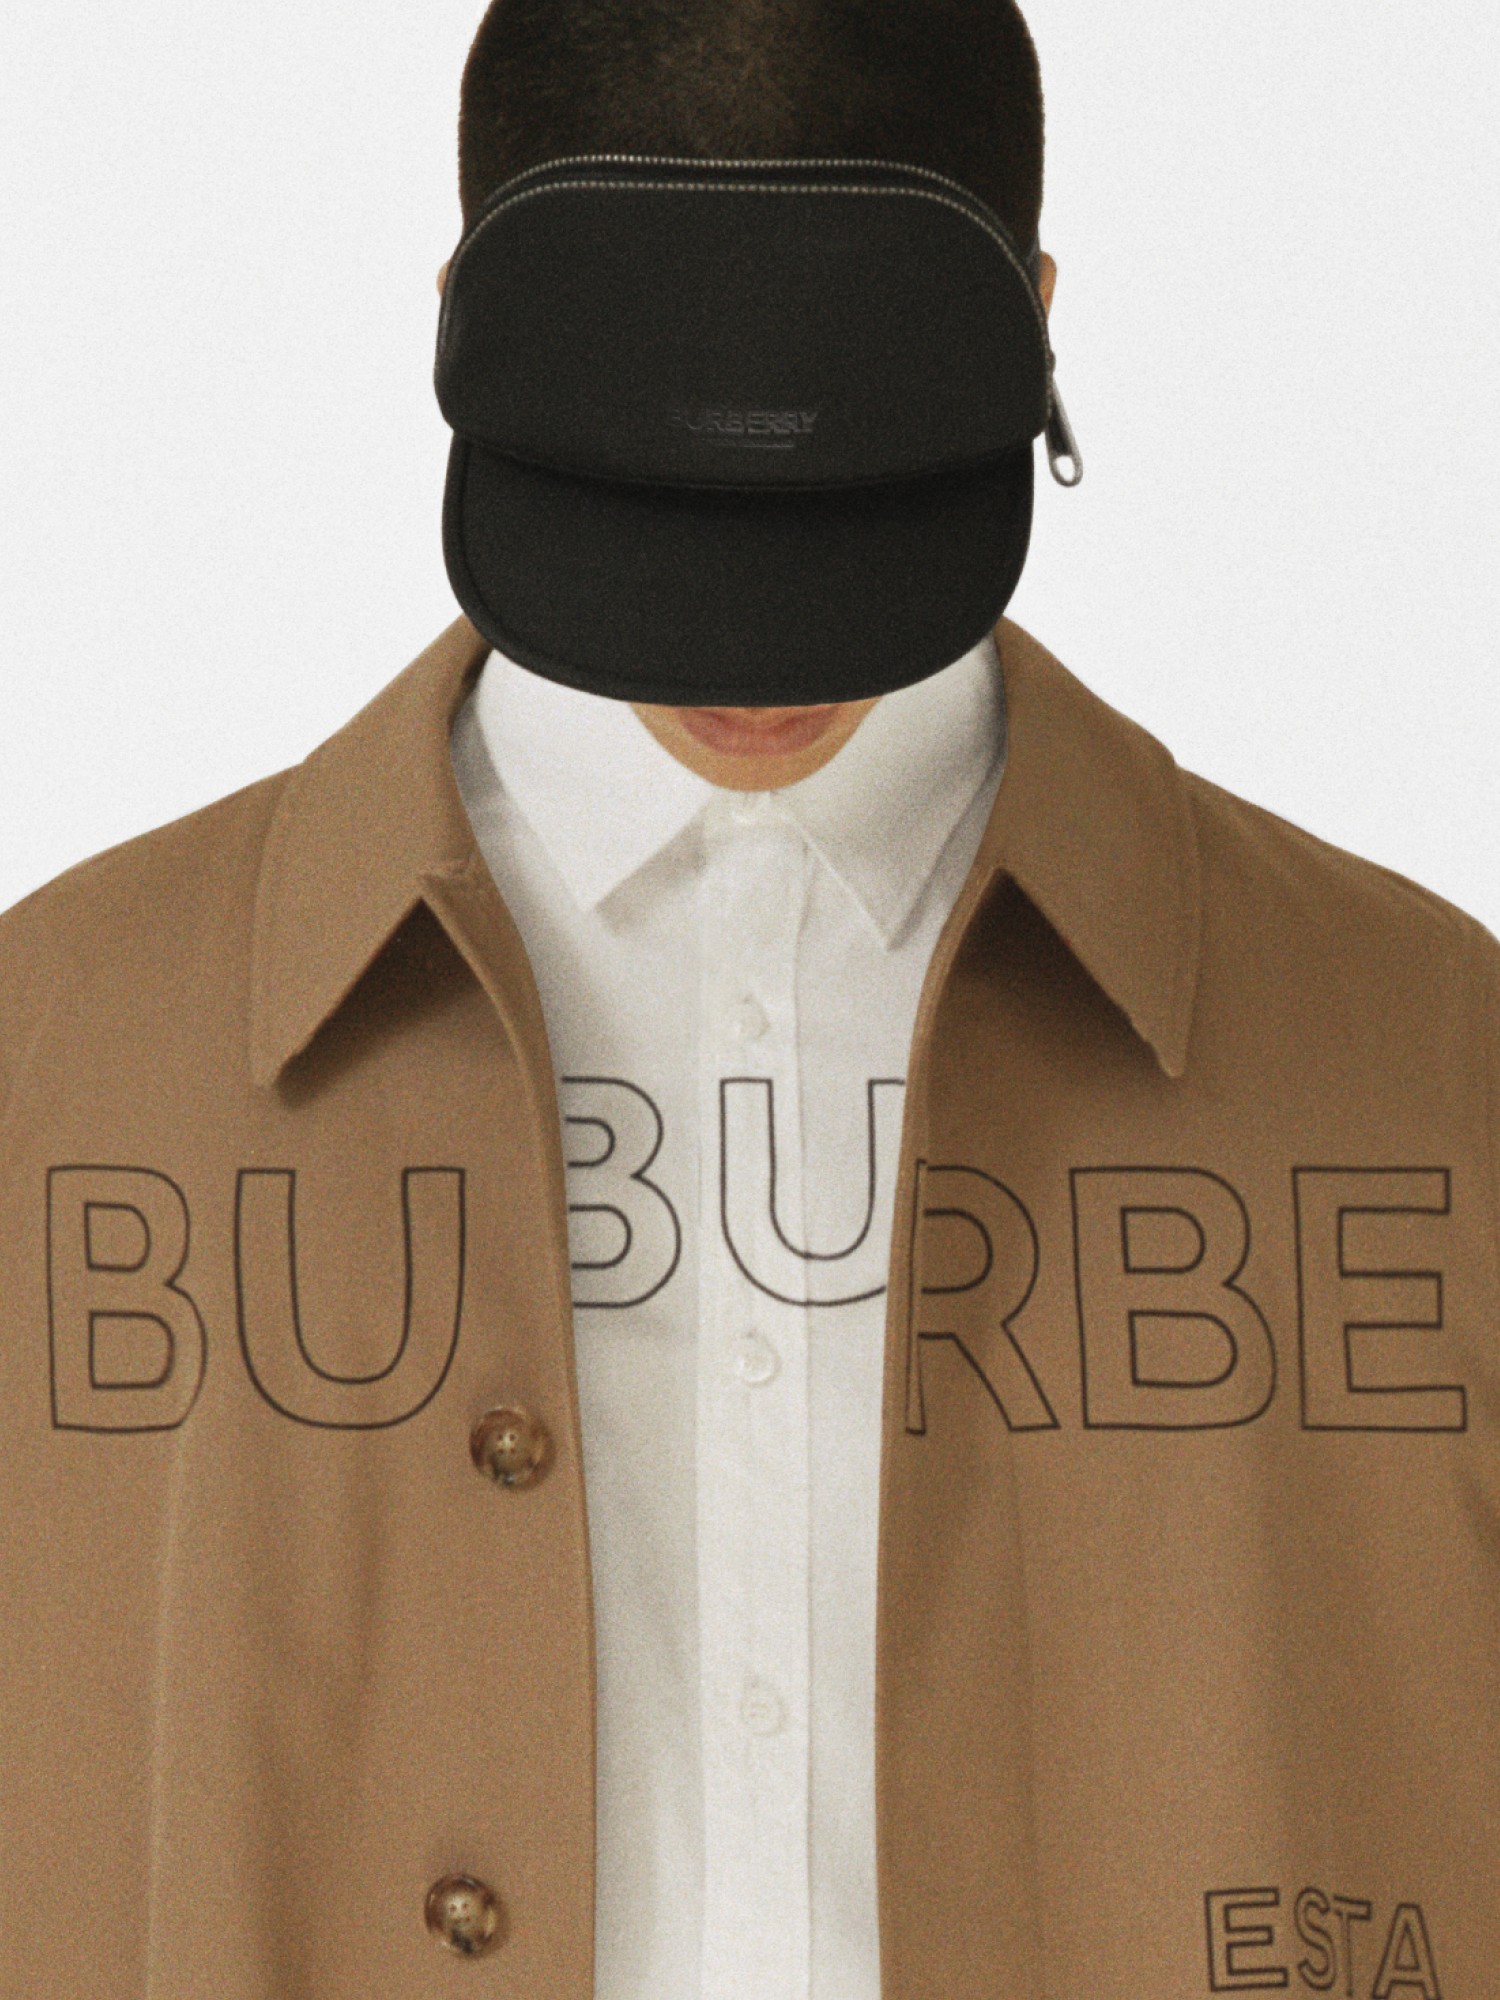 Join the World of Burberry® Official